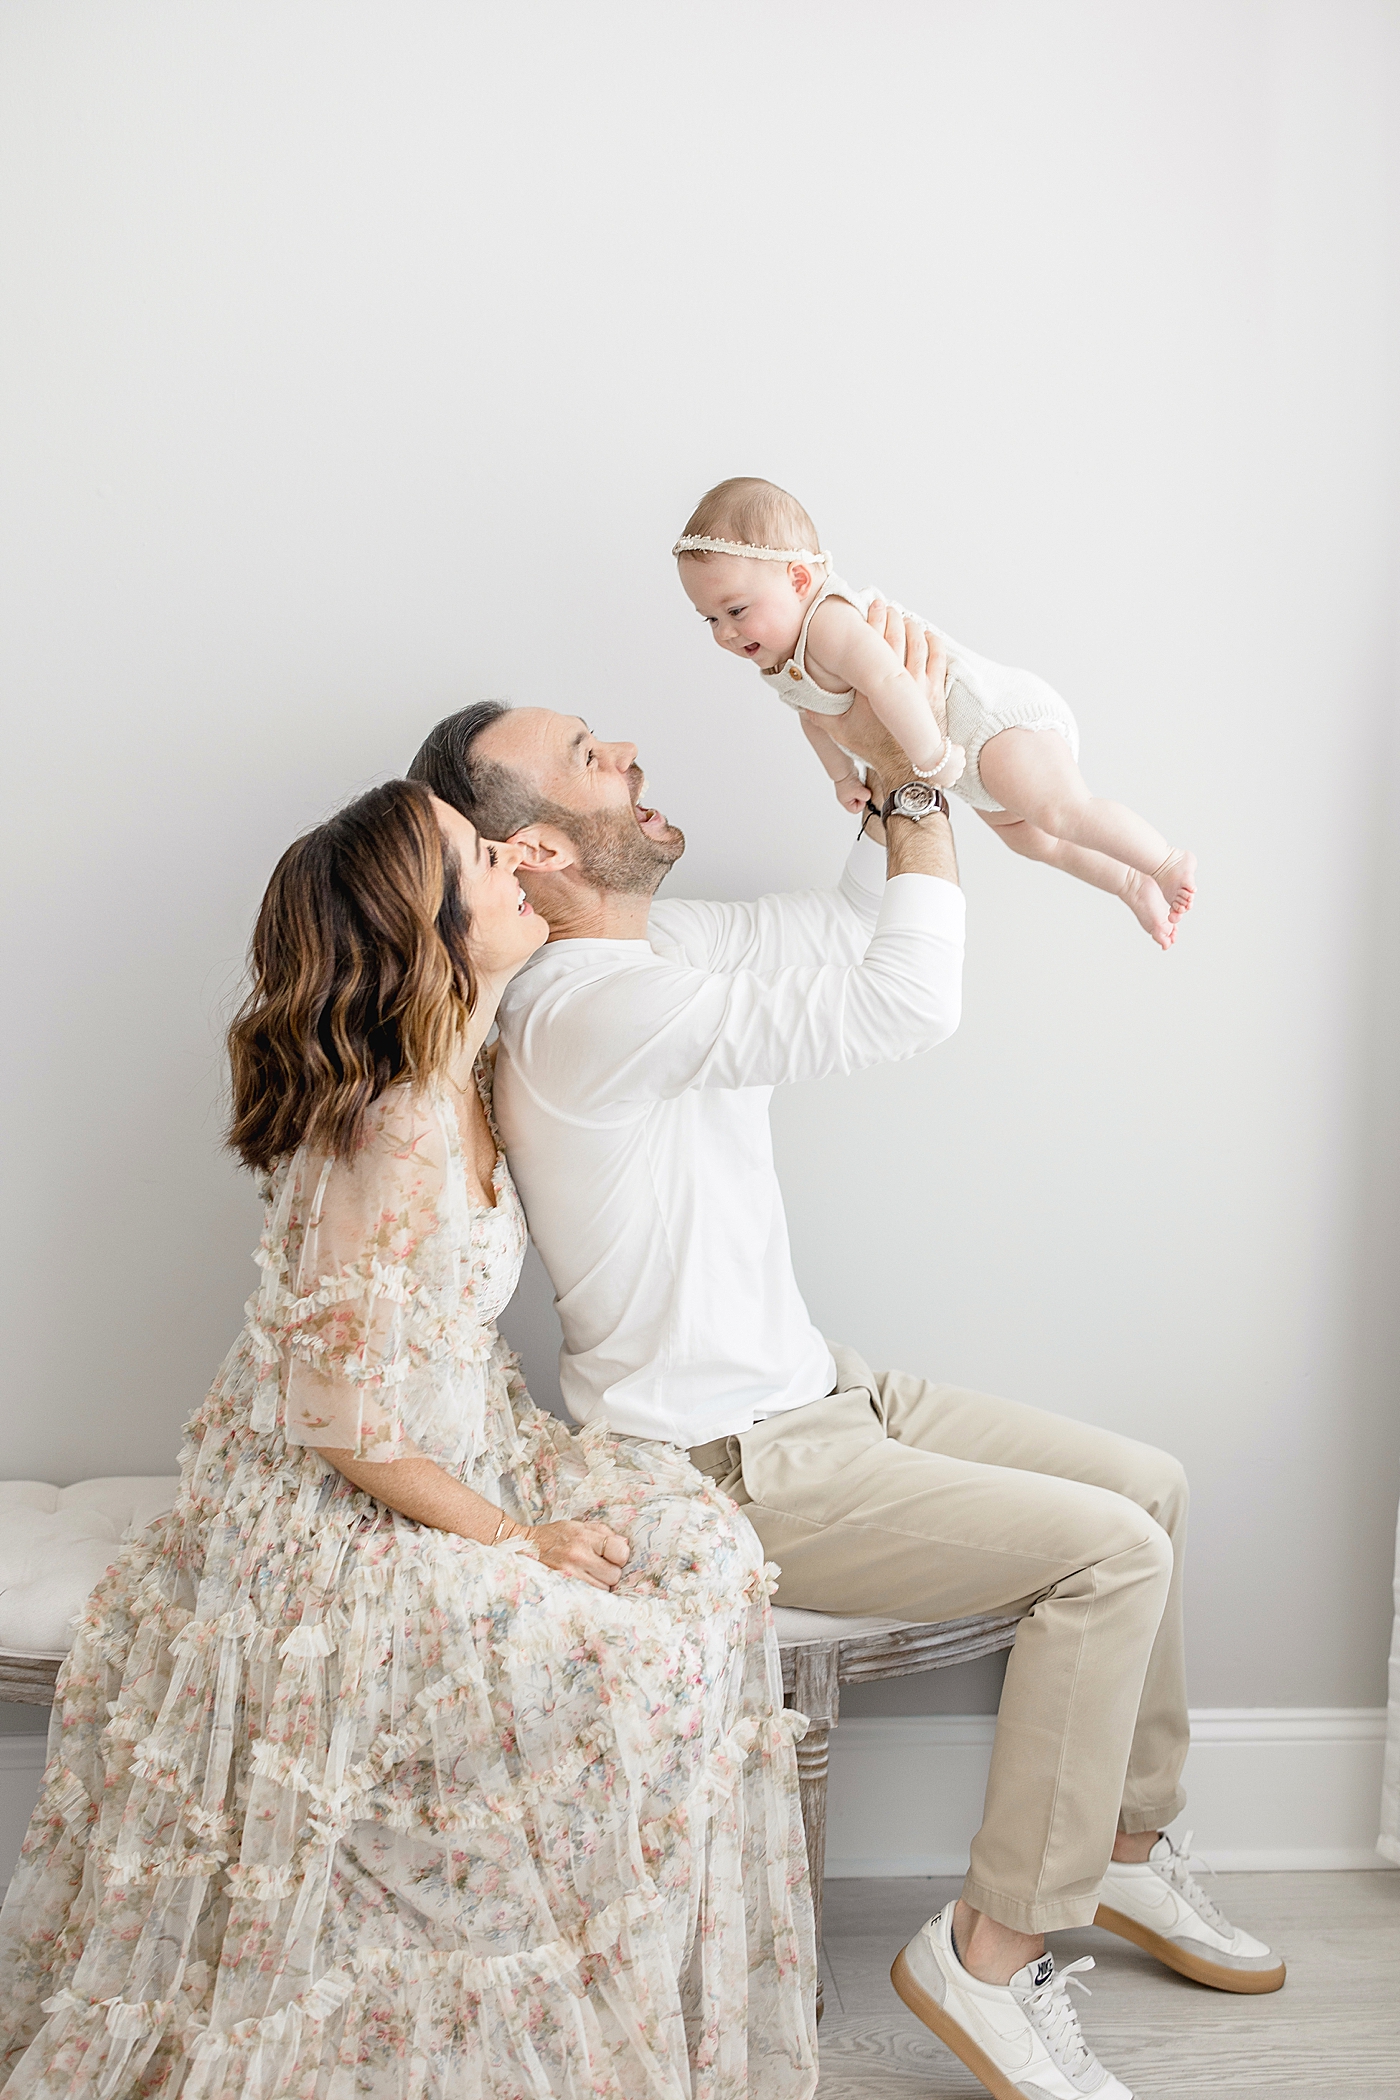 Mom and Dad playing with their six month old daughter. Photo by Brittany Elise Photography.